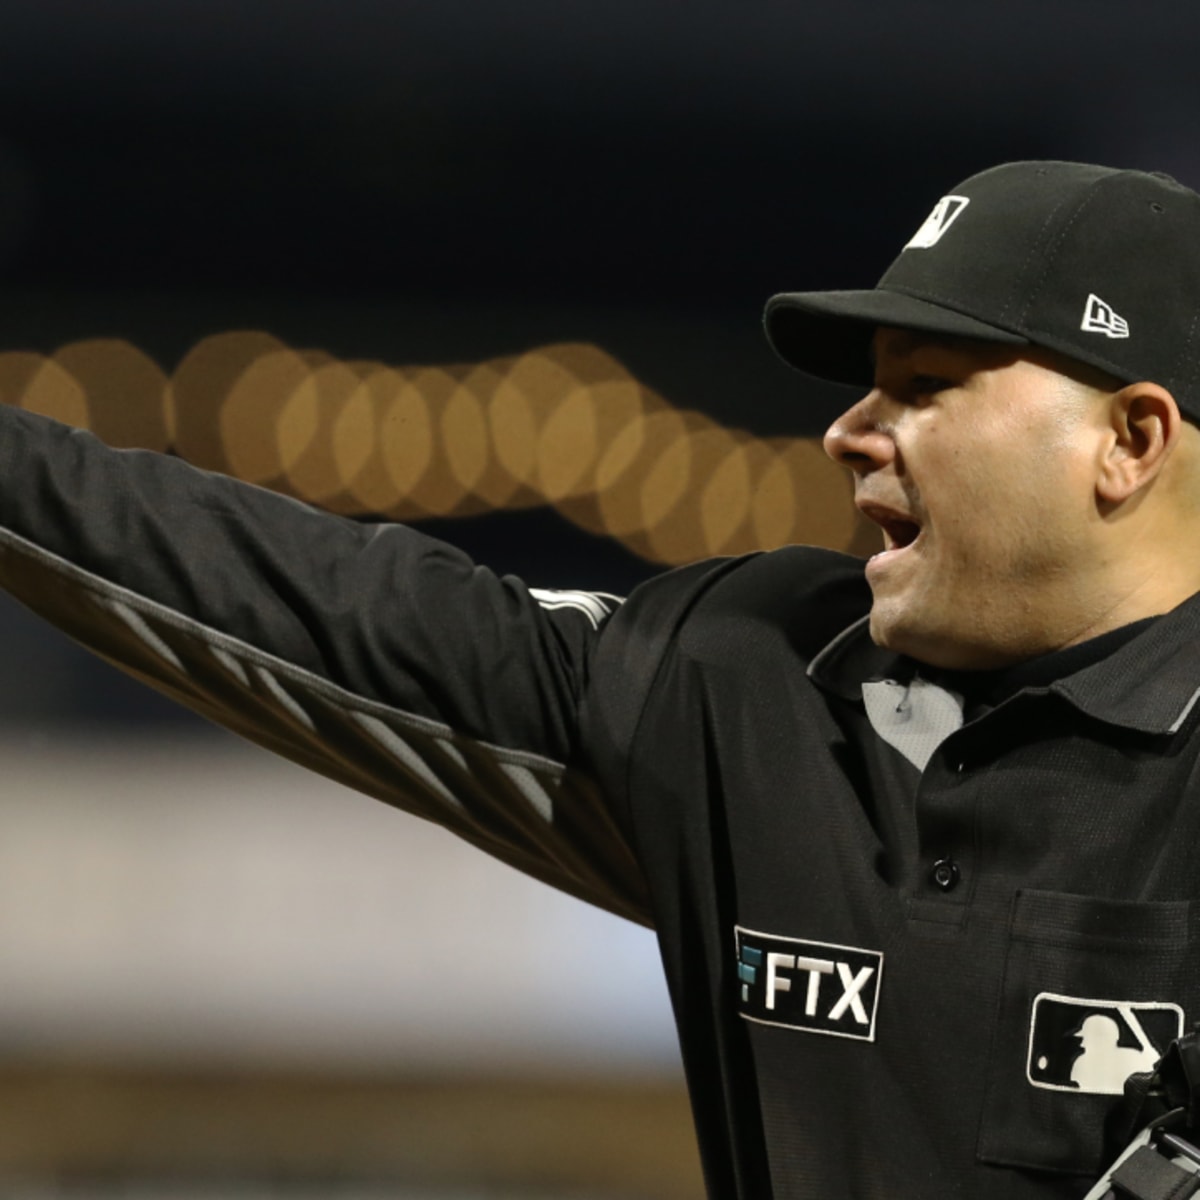 MLB's New FTX Umpire Uniform Patch Replaced Traditional Memorial Tributes  to Fallen Colleagues 